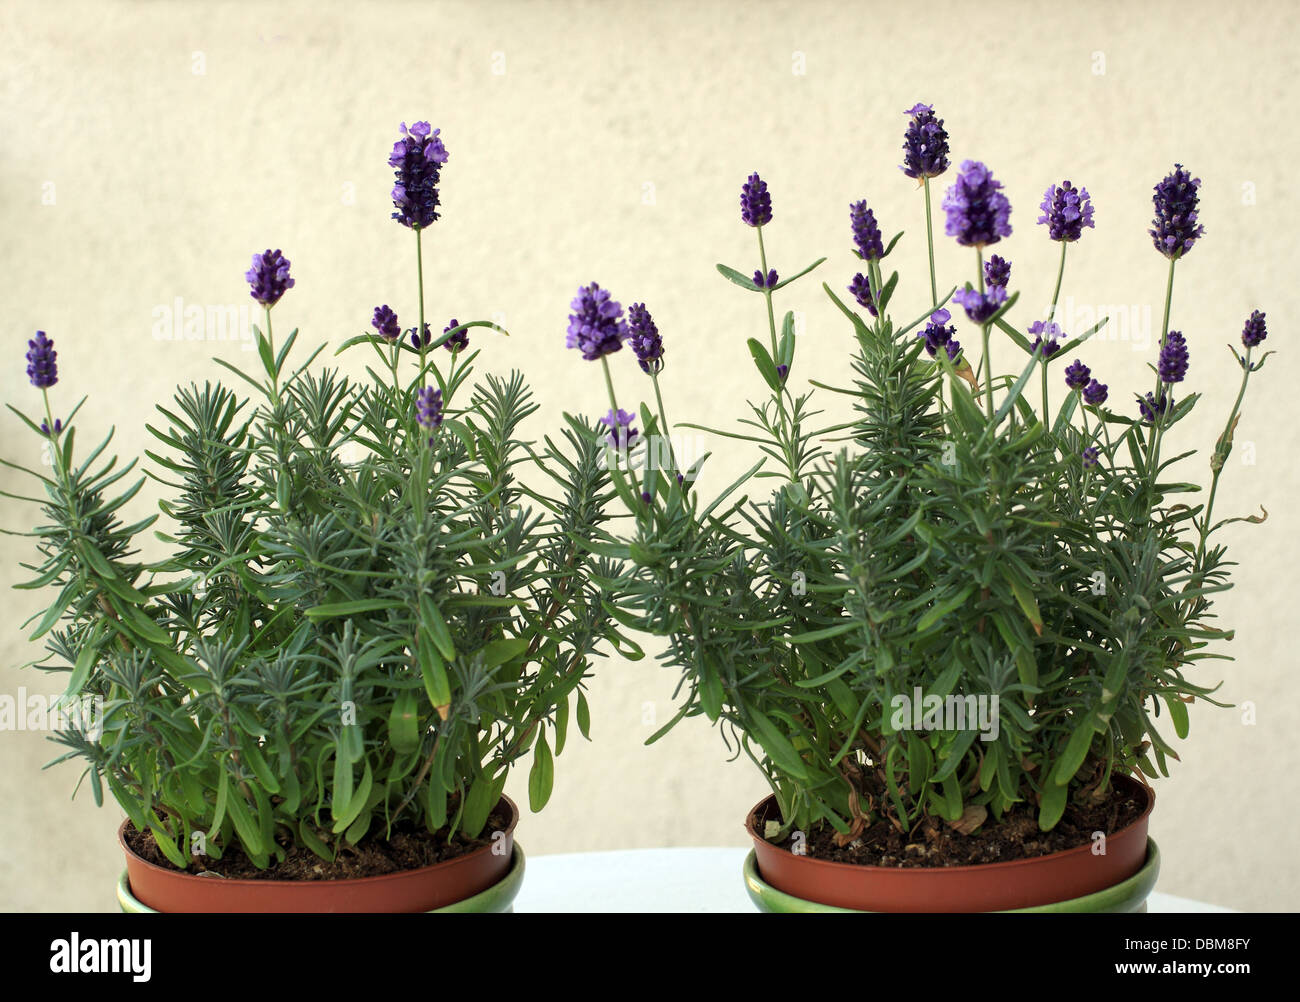 Two flower pots with blue lavender photographed on white background Stock Photo